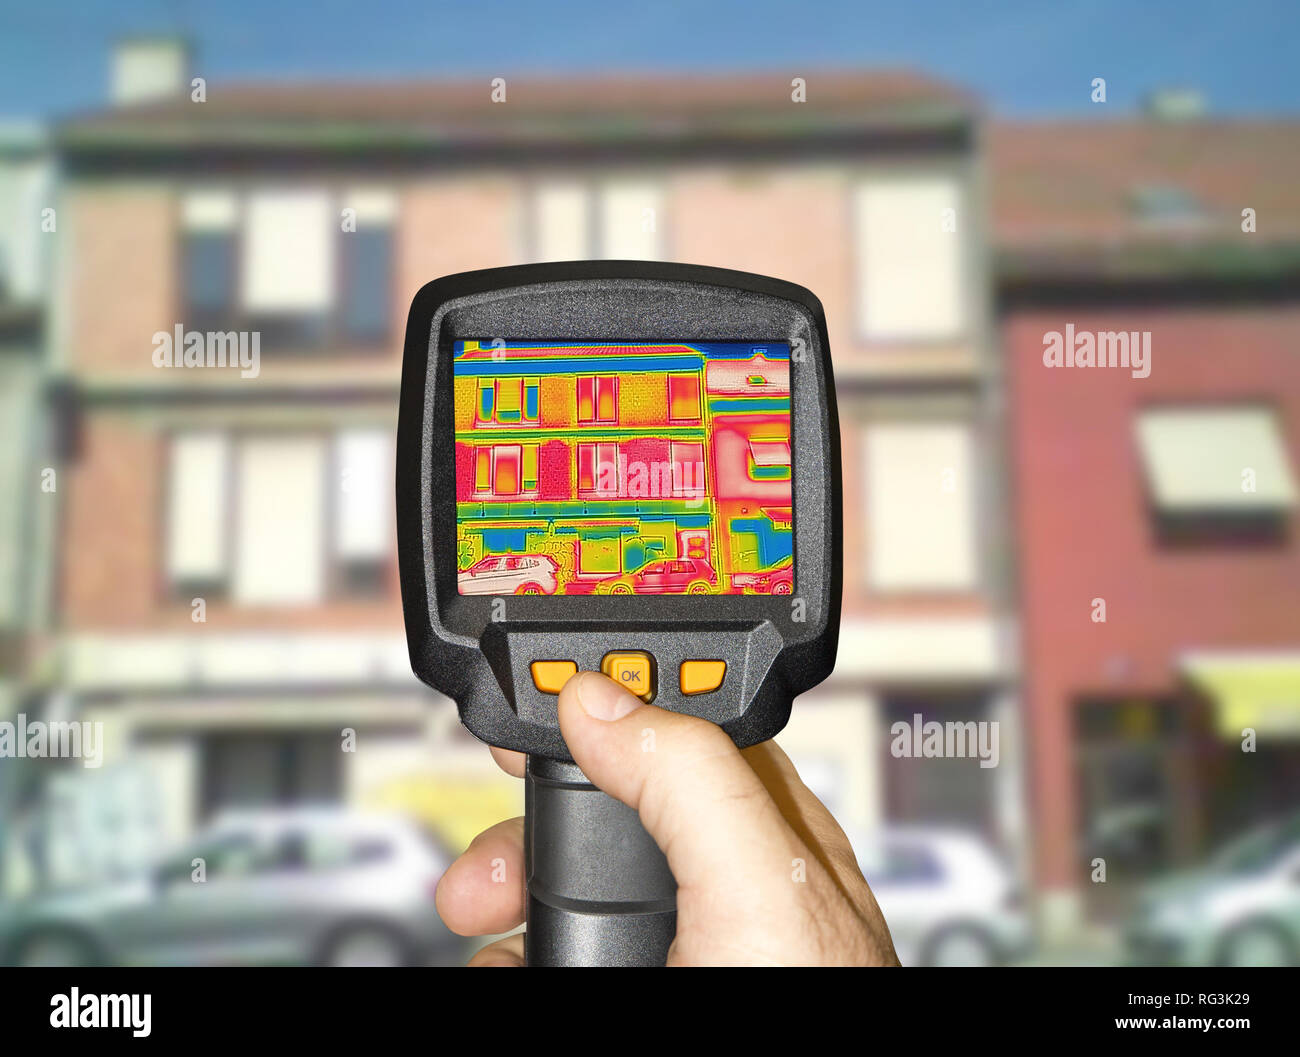 Detecting Heat Loss Outside building Using Thermal Camera Stock Photo